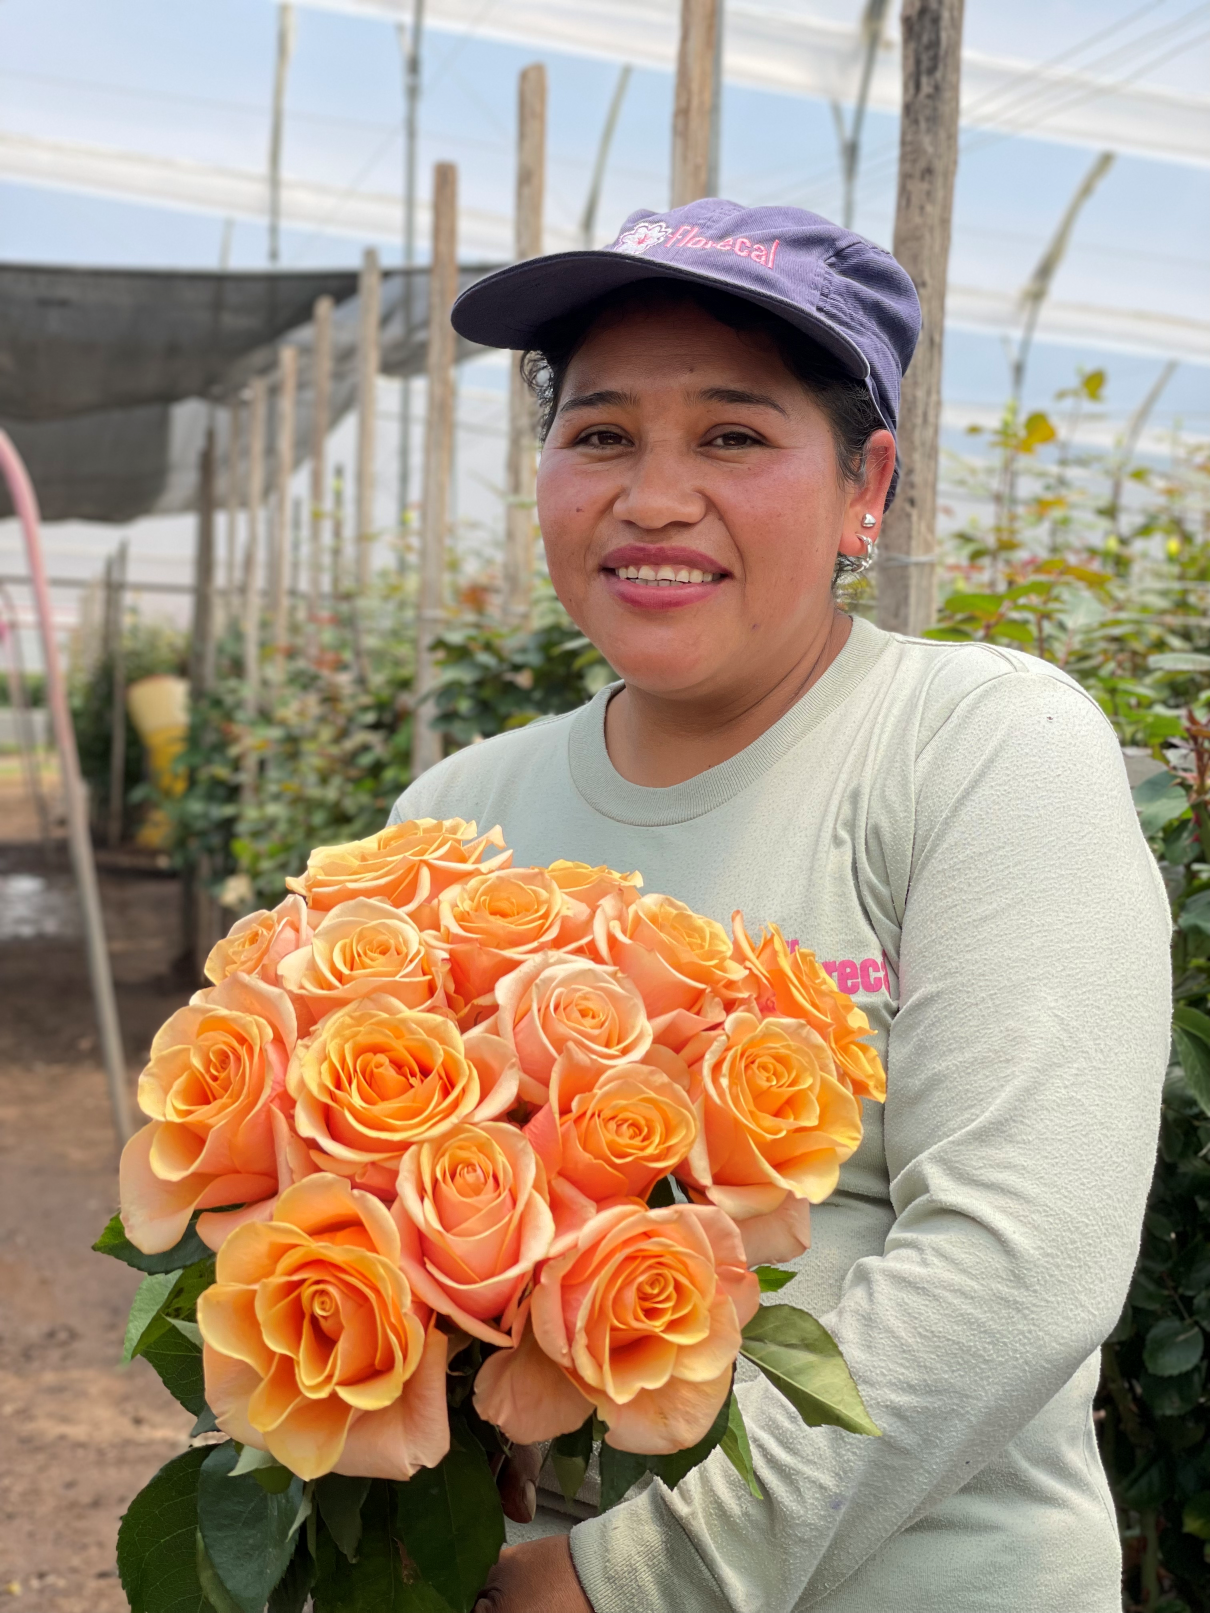 Florecal Worker Holding Bouquet of Roses